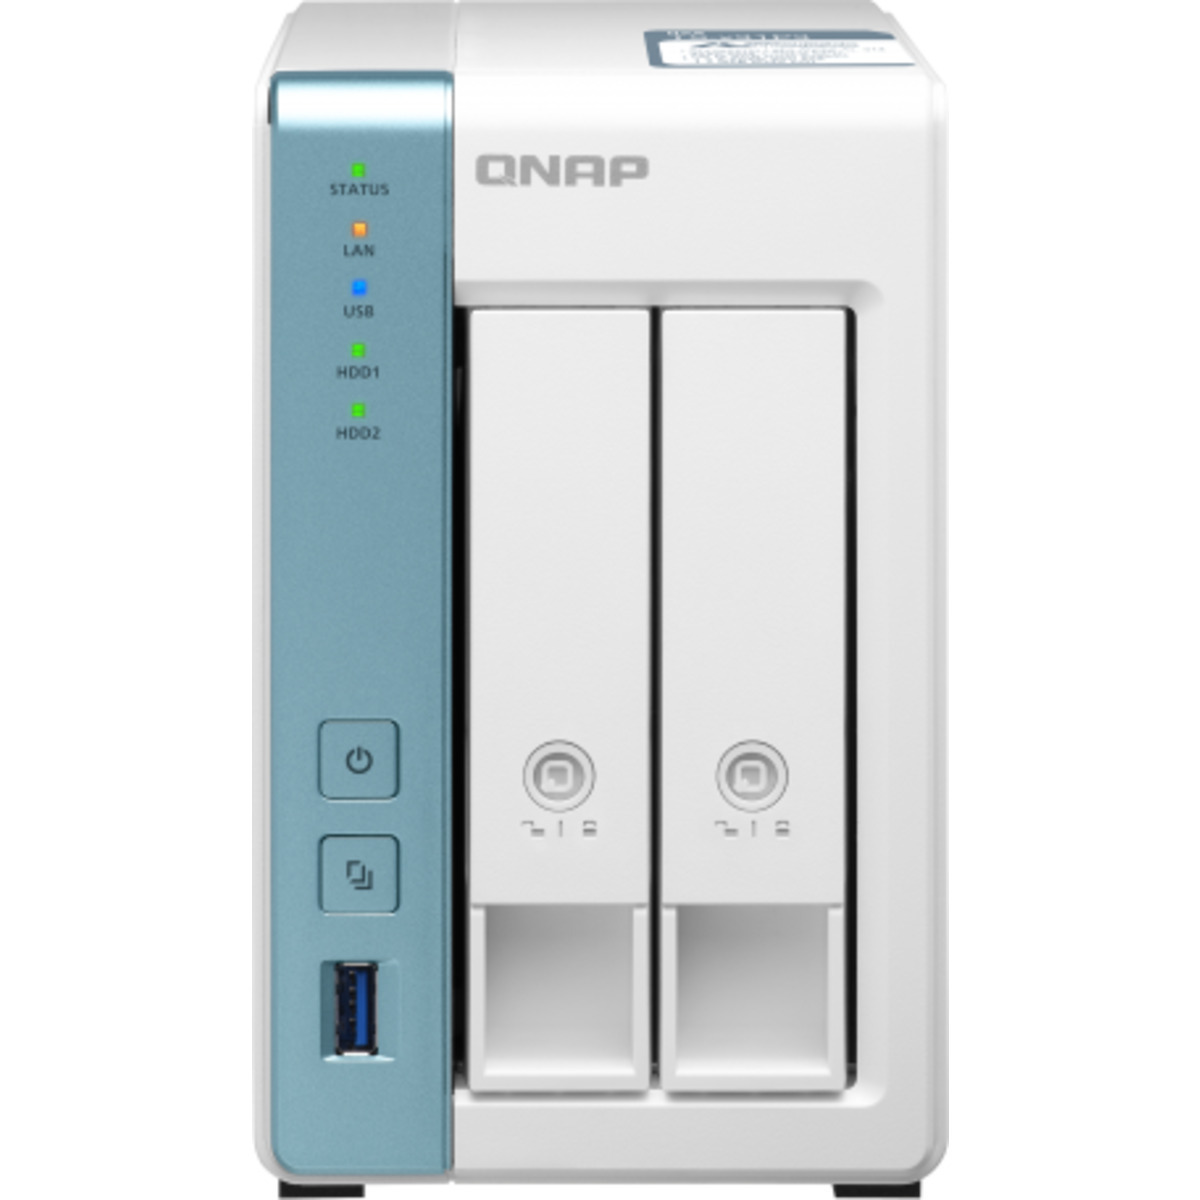 buy $1363 QNAP TS-231P3 28tb Desktop NAS - Network Attached Storage Device 2x14000gb Western Digital Red Plus WD140EFGX 3.5 7200rpm SATA 6Gb/s HDD NAS Class Drives Installed - Burn-In Tested - FREE RAM UPGRADE - nas headquarters buy network attached storage server device das new raid-5 free shipping usa christmas new year holiday sale TS-231P3